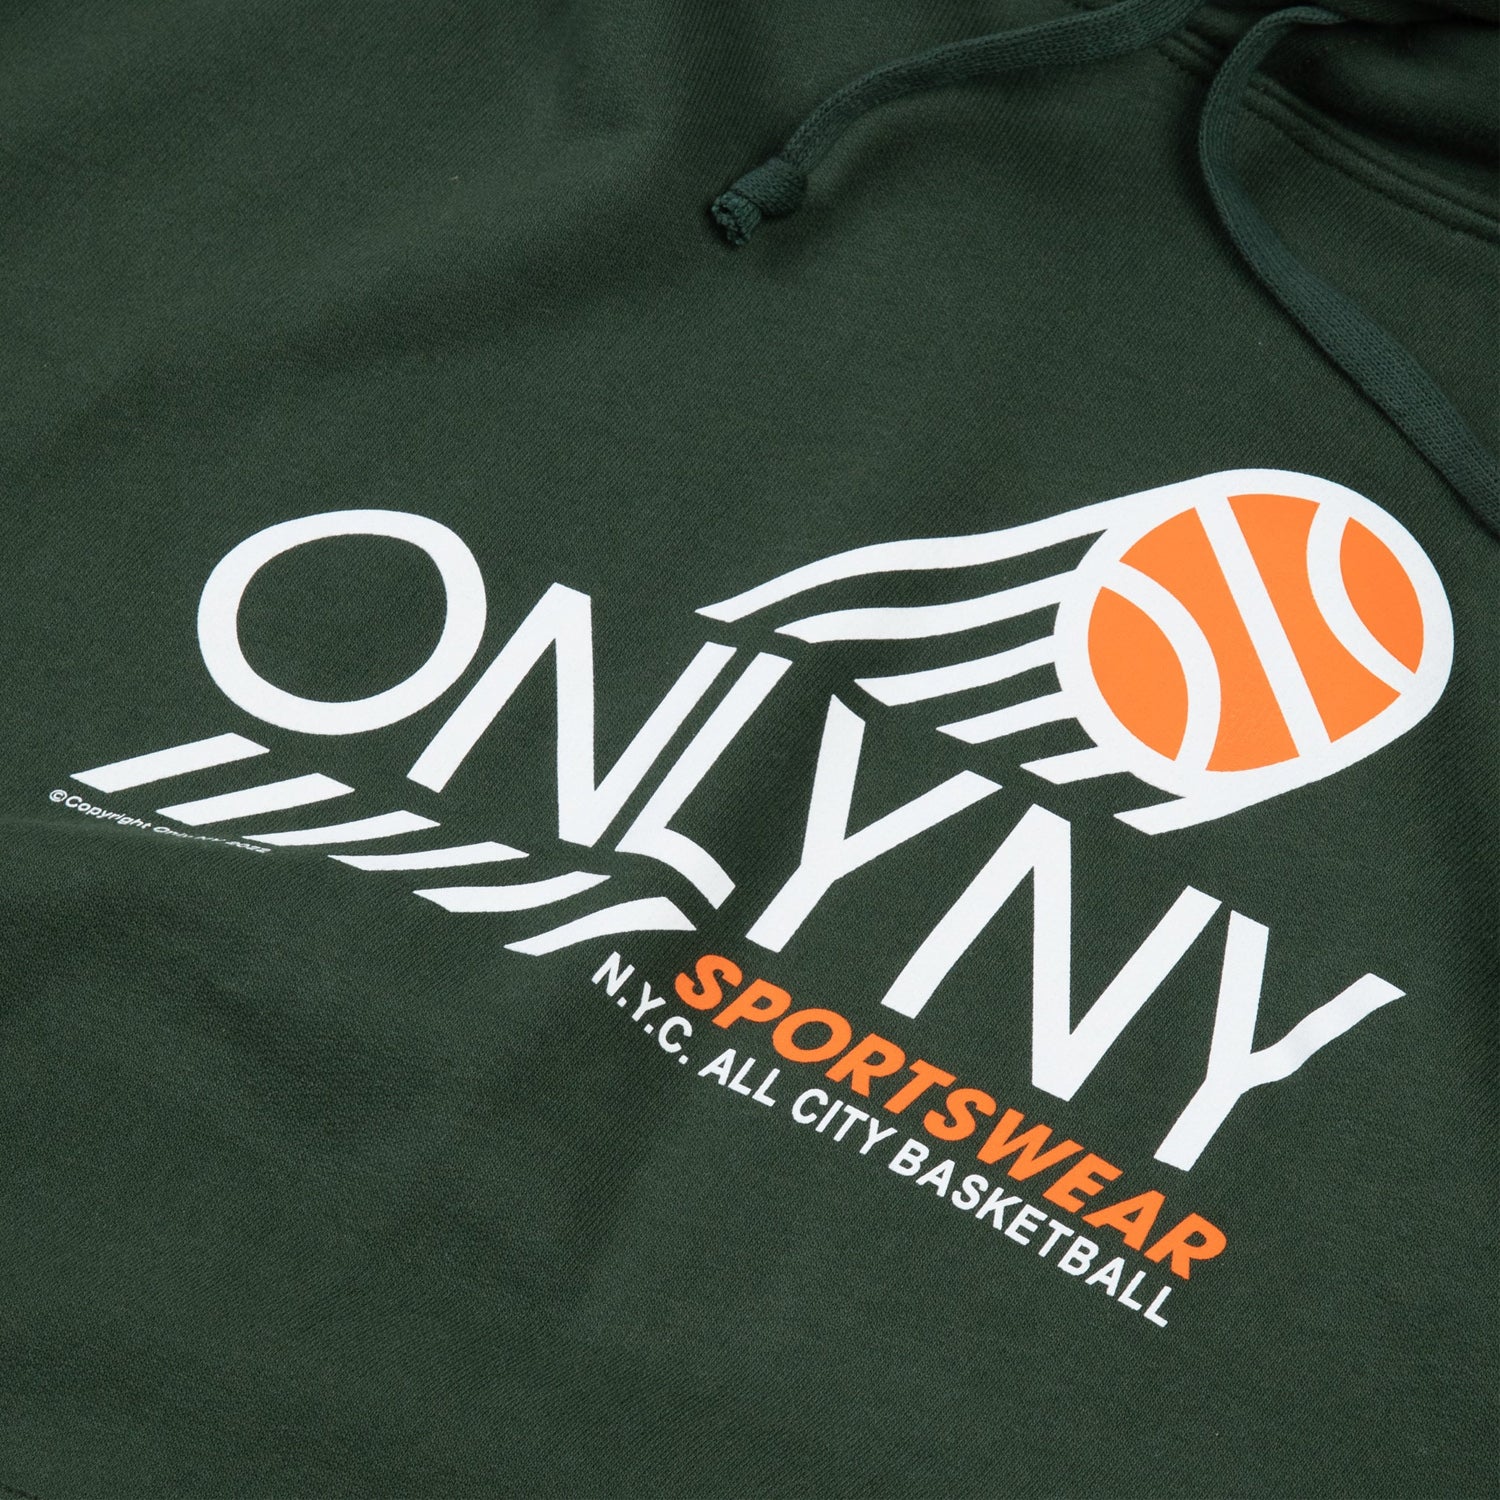 All City Basketball Hoodie DARK GREEN
Mid-weight 100% Cotton brushed back fleece.Screenprinted graphic.1x1 rib at cuffs and hem.Made in Peru. ONLYNY